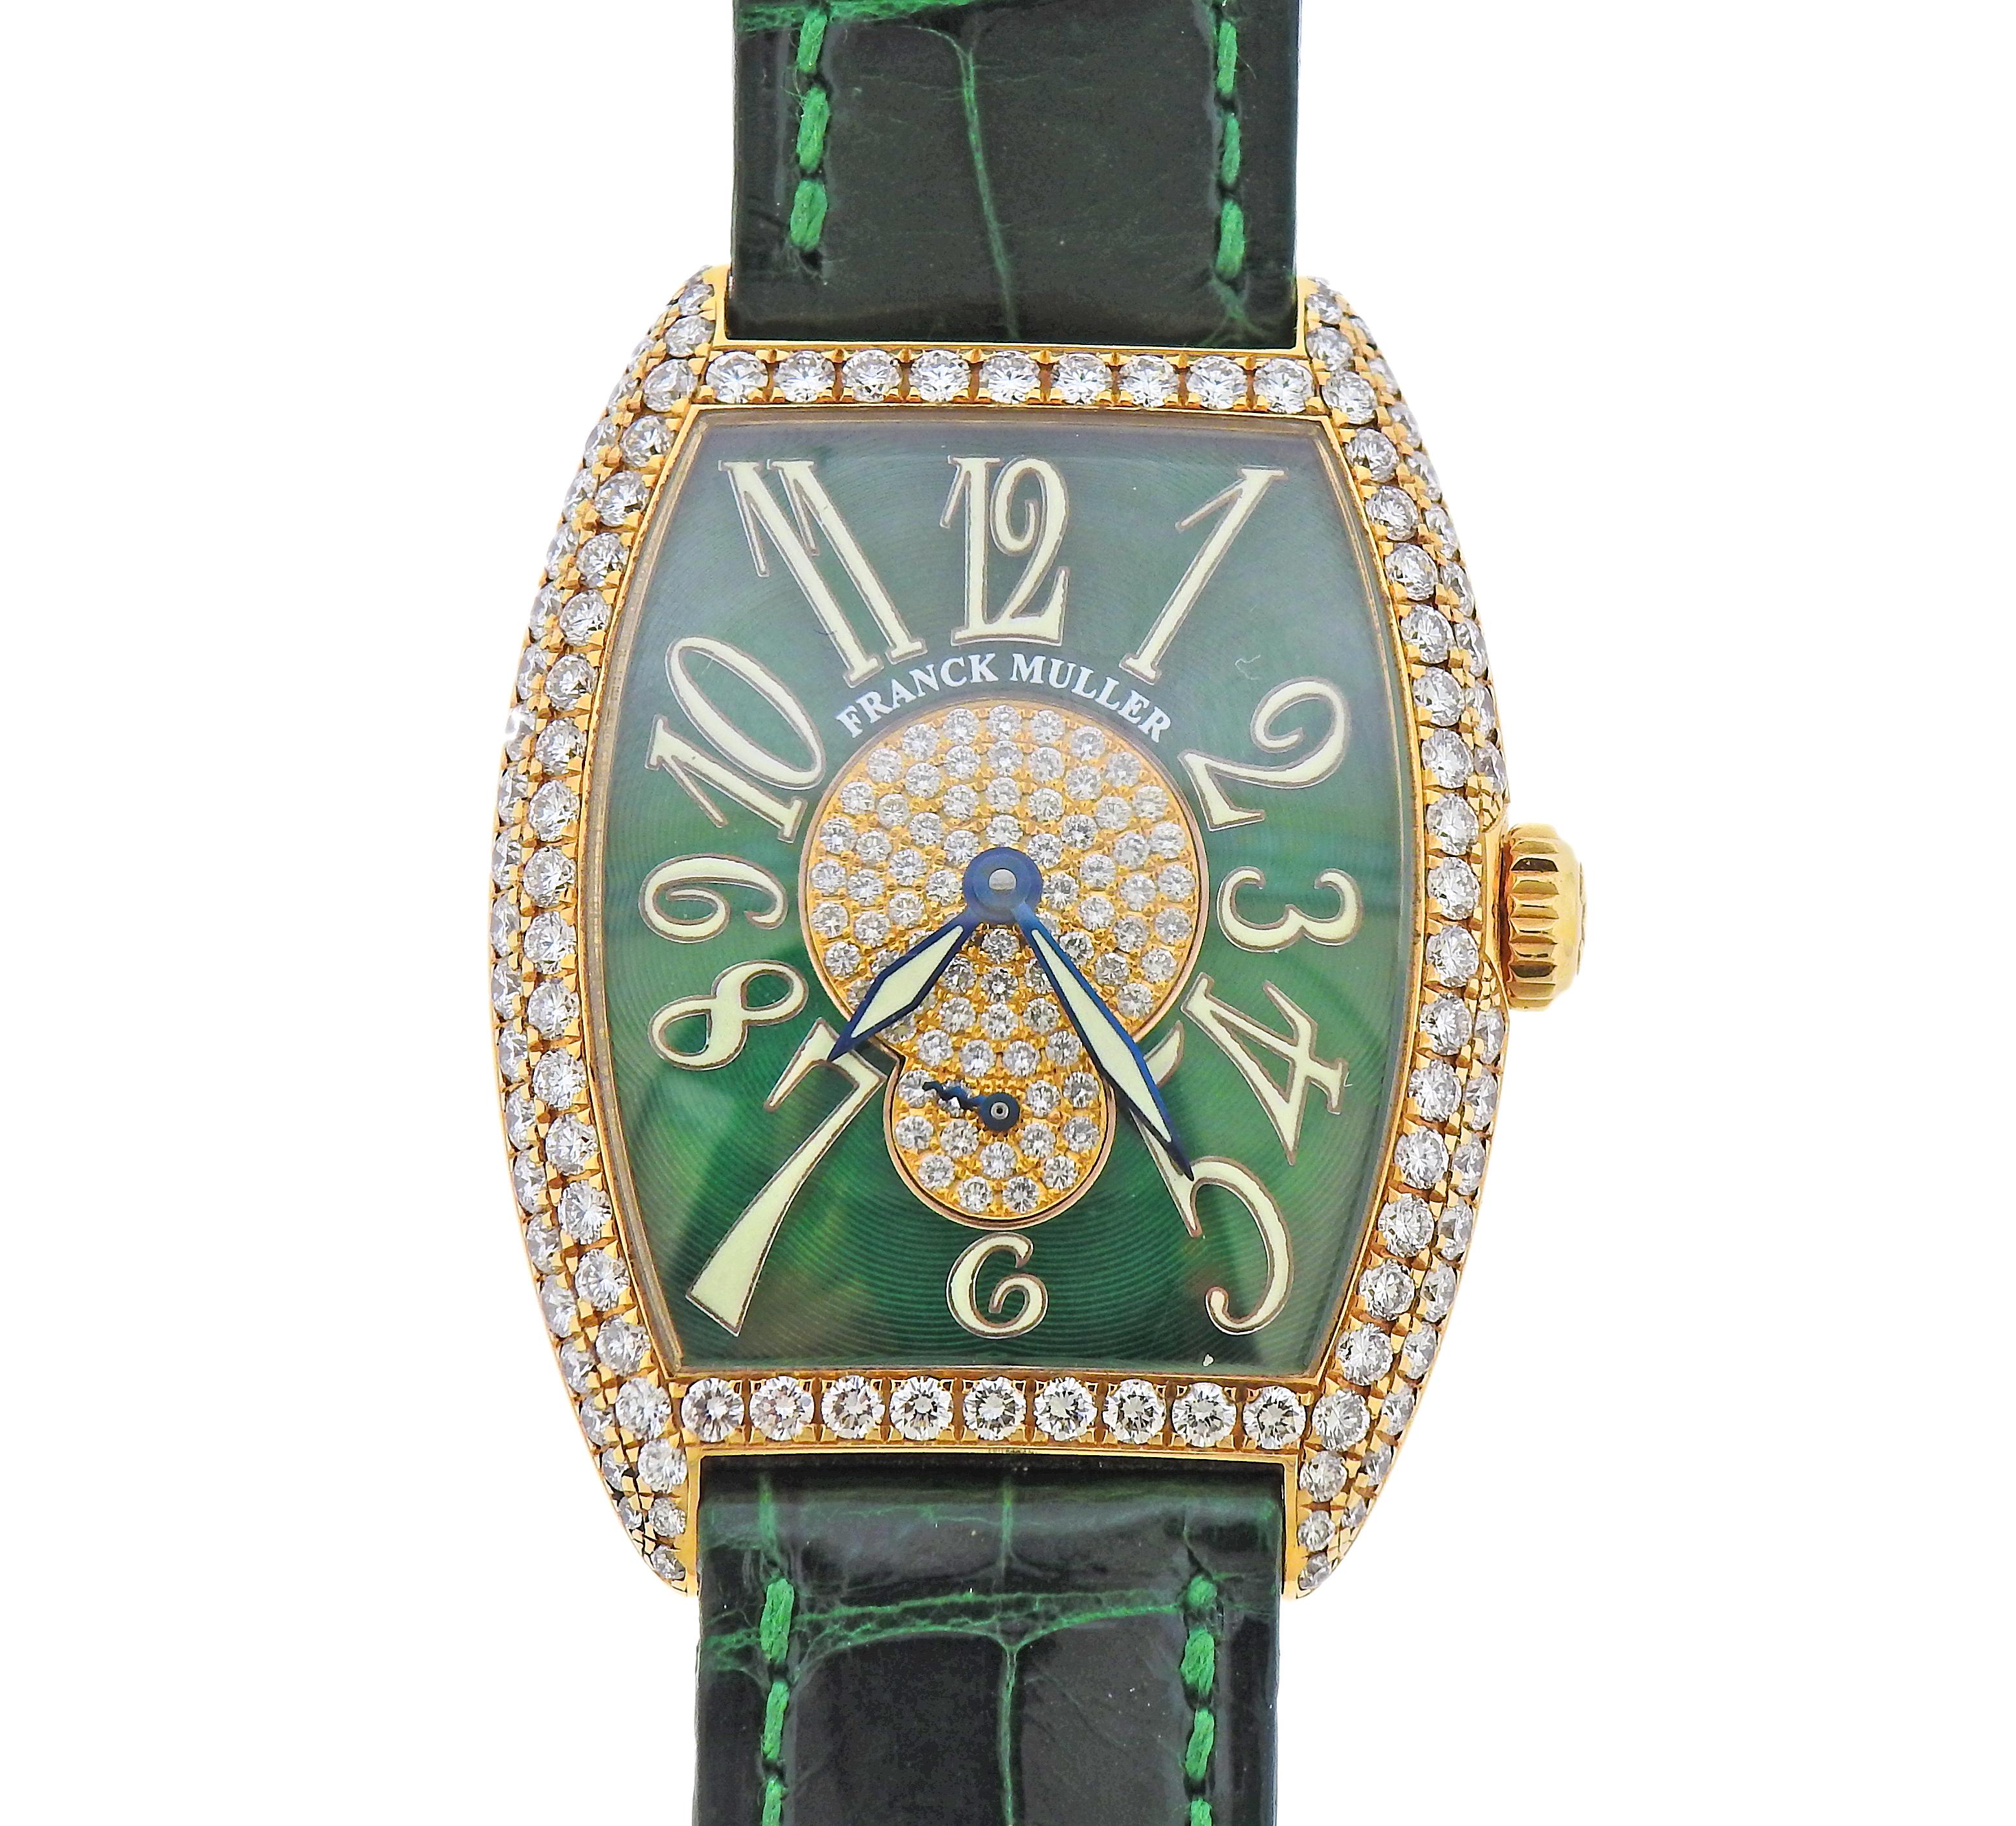 18k yellow gold case Franck Muller Cintree Curvex lady's watch with green dial and green leather FM band, 18k gold buckle. Dial and case decorated with diamonds.  Features mechanical movement in working order. Case - 29mm excl. crown x 38mm,